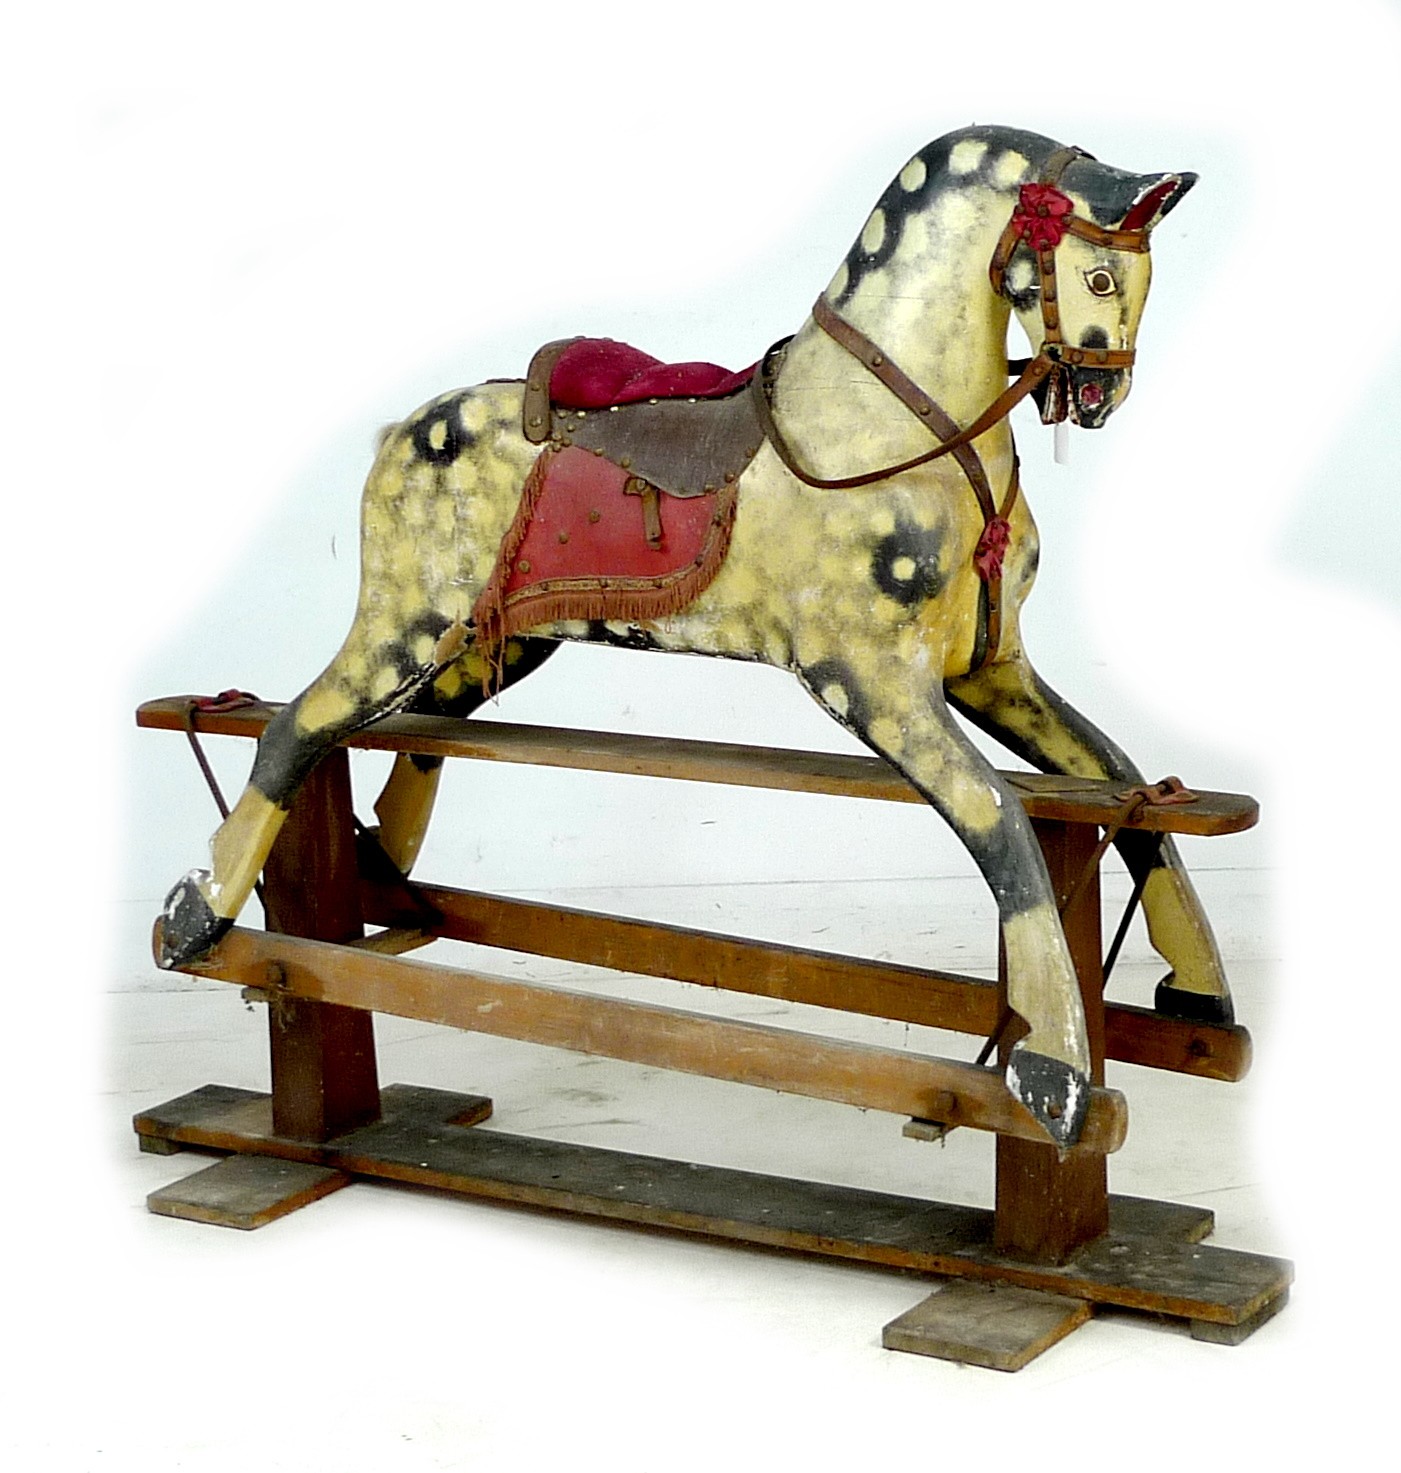 A mid 20th century carved wooden rocking horse, dappled grey coat, red saddle, on a pine base with